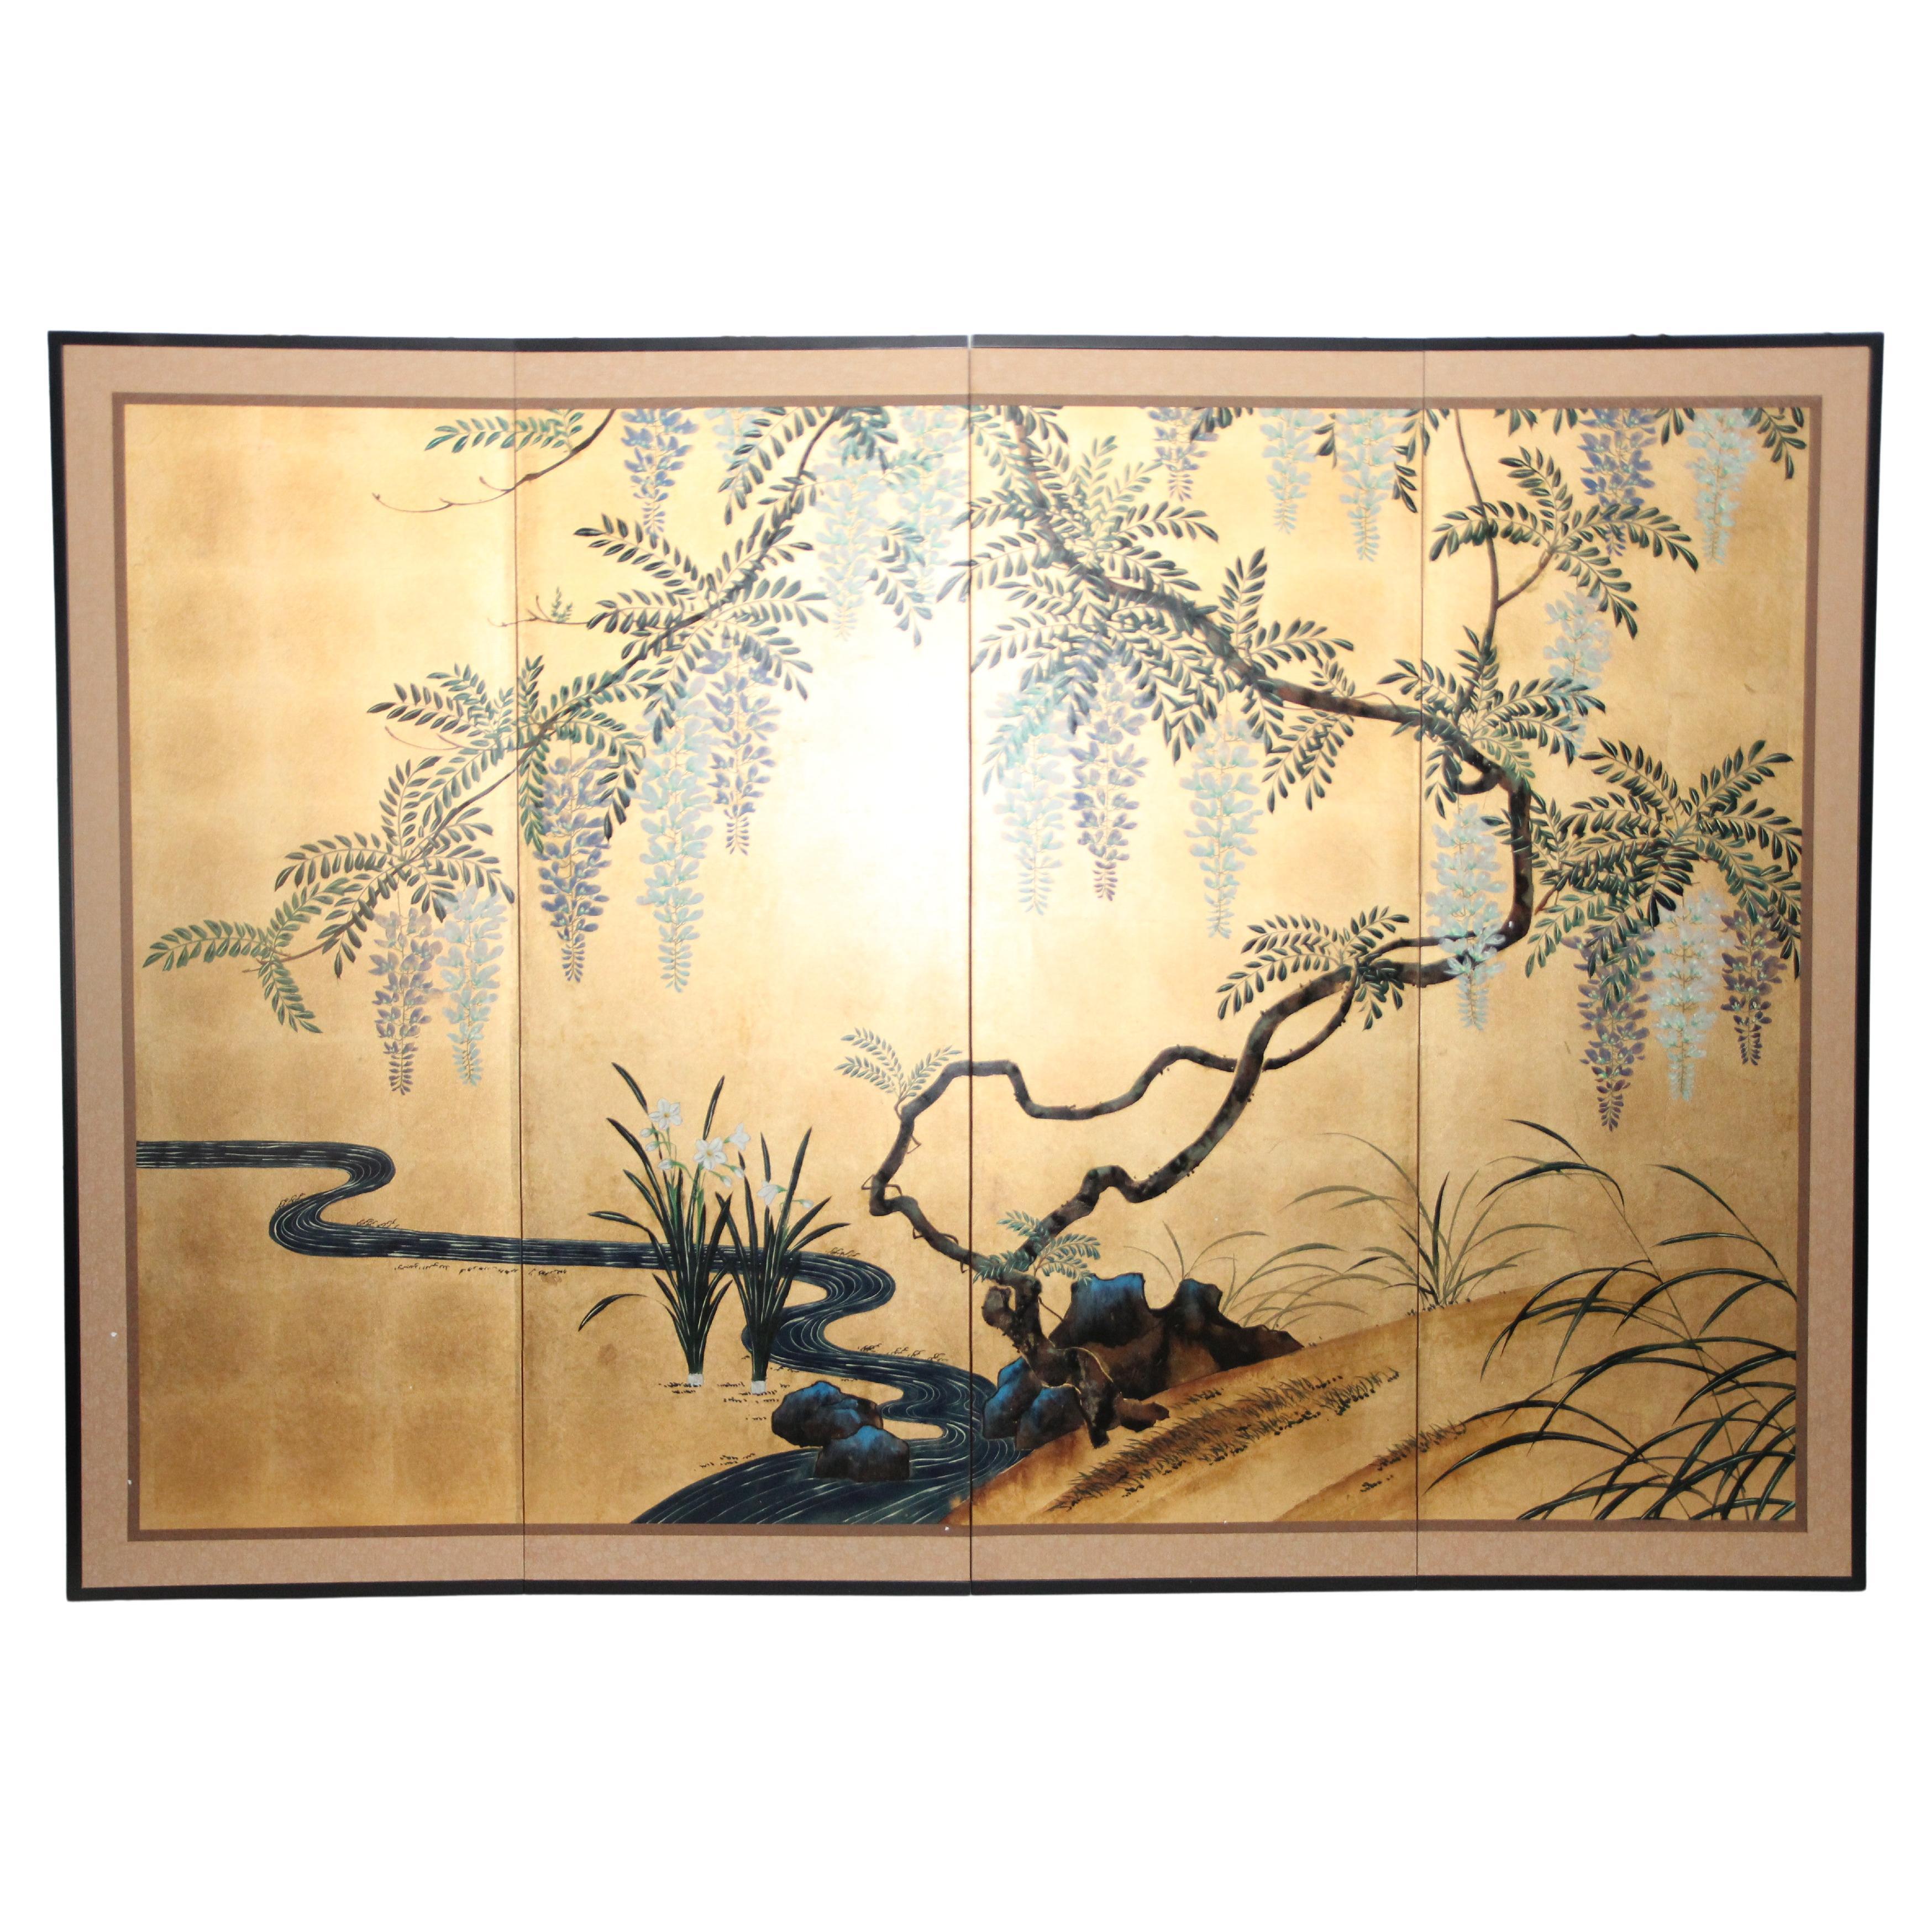 Hand-Painted Japanese Folding Screen Byobu Floral Painting, Watercolor Gold Leaf